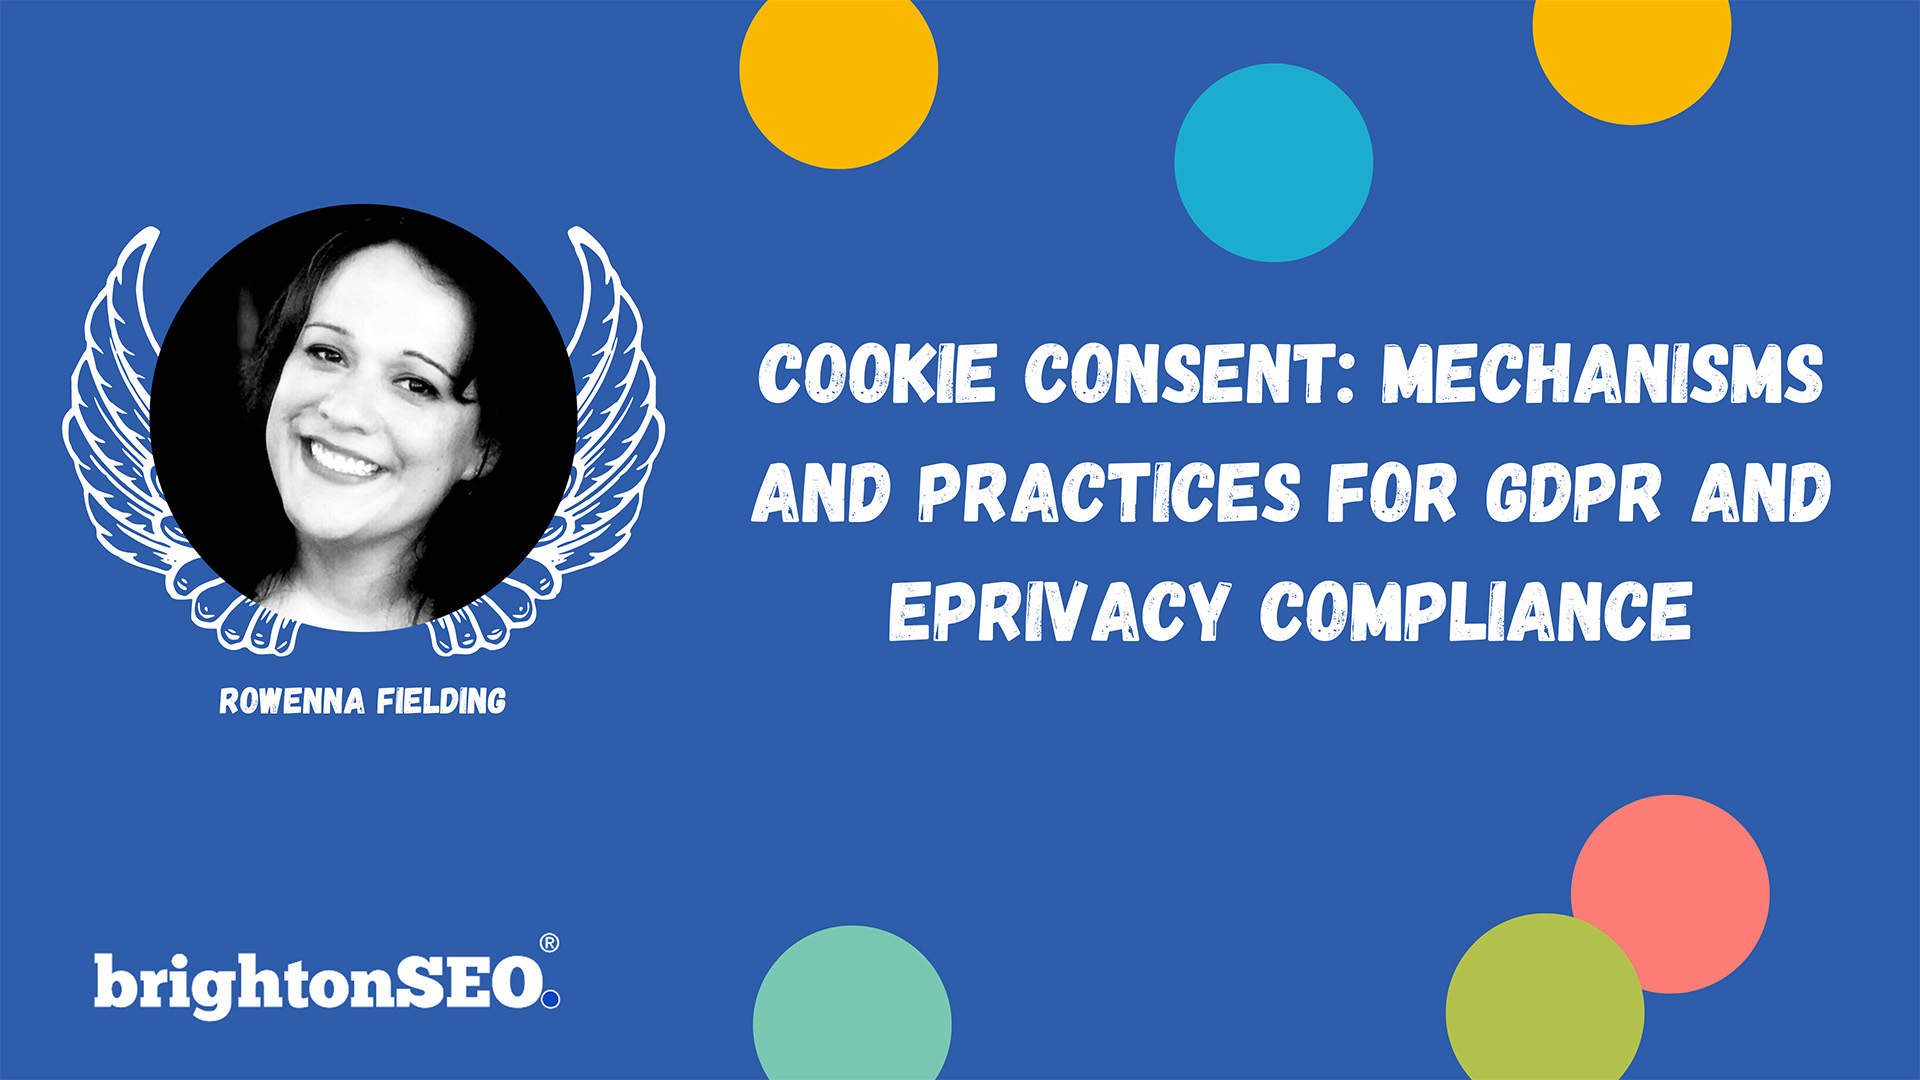 Cookie consent: mechanisms and practices for GDPR and ePrivacy compliance